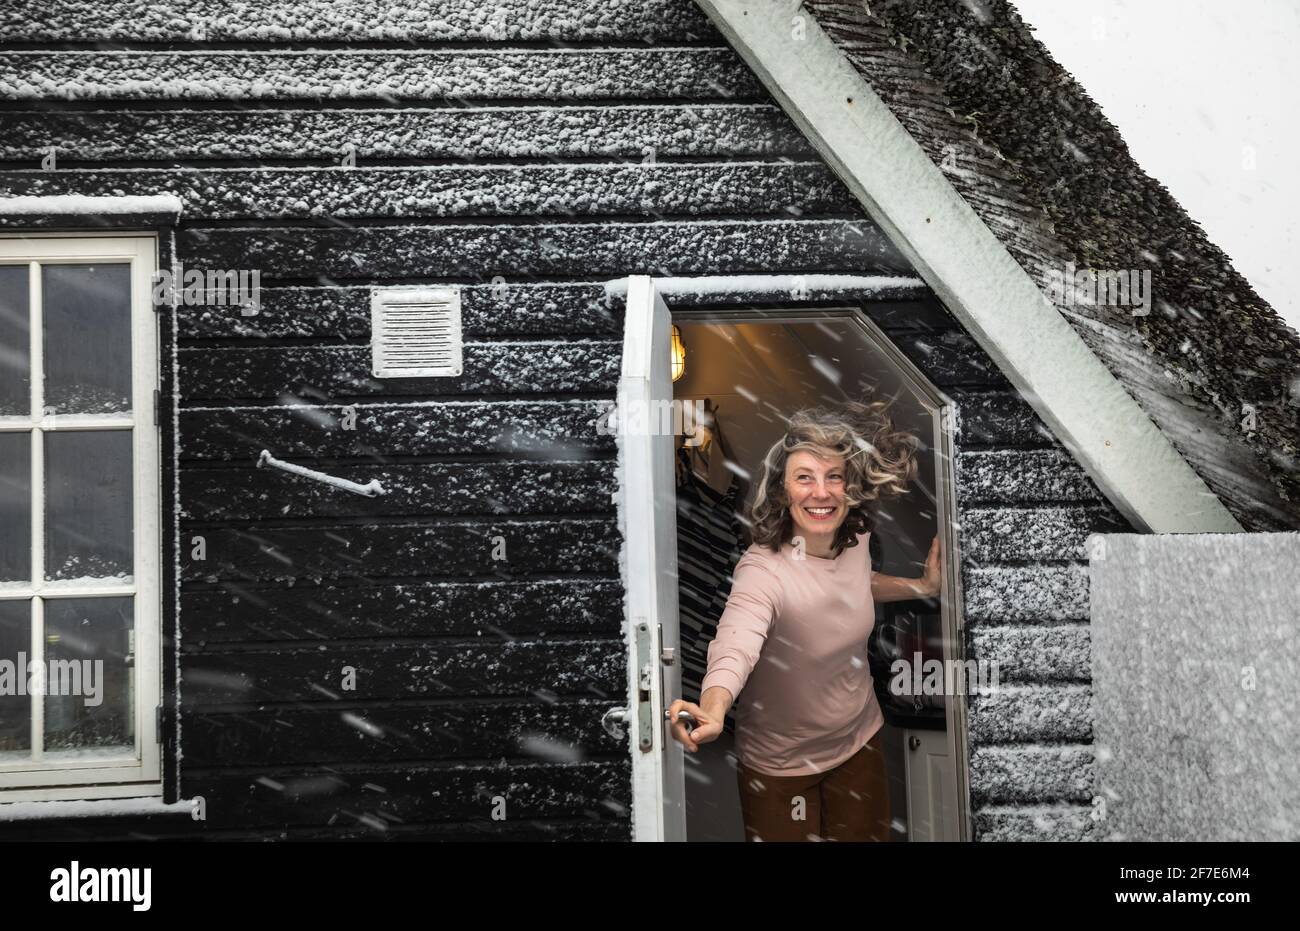 Woman Holding Door Open With Hair Blowing In Snow Storm in Denmark Stock Photo